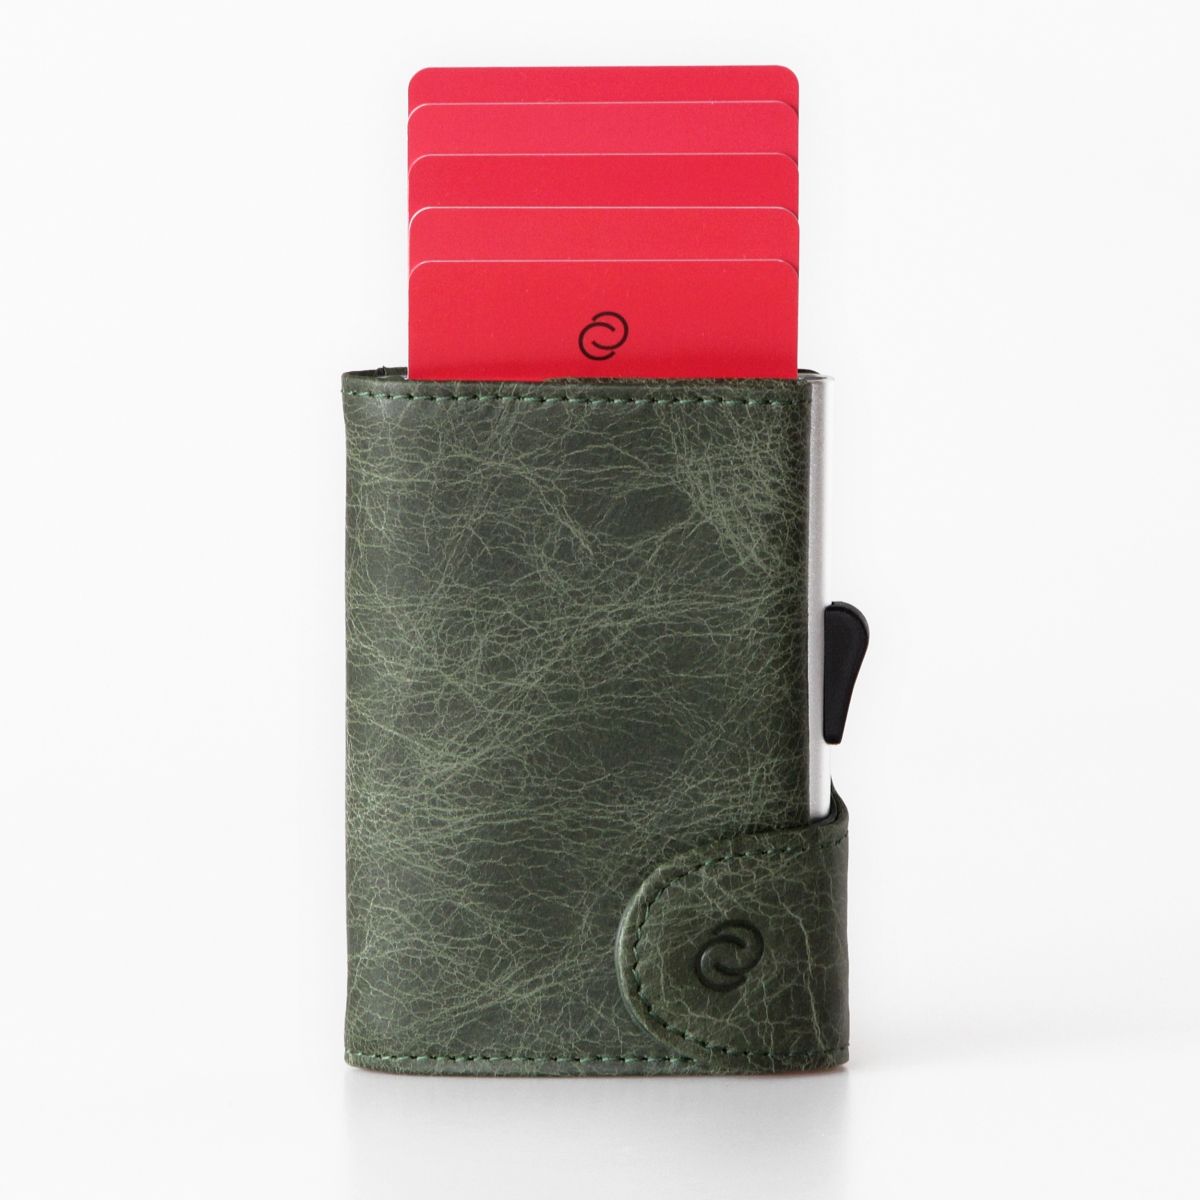 C-Secure Aluminum Card Holder with Genuine Leather and Coin Pouch - Green